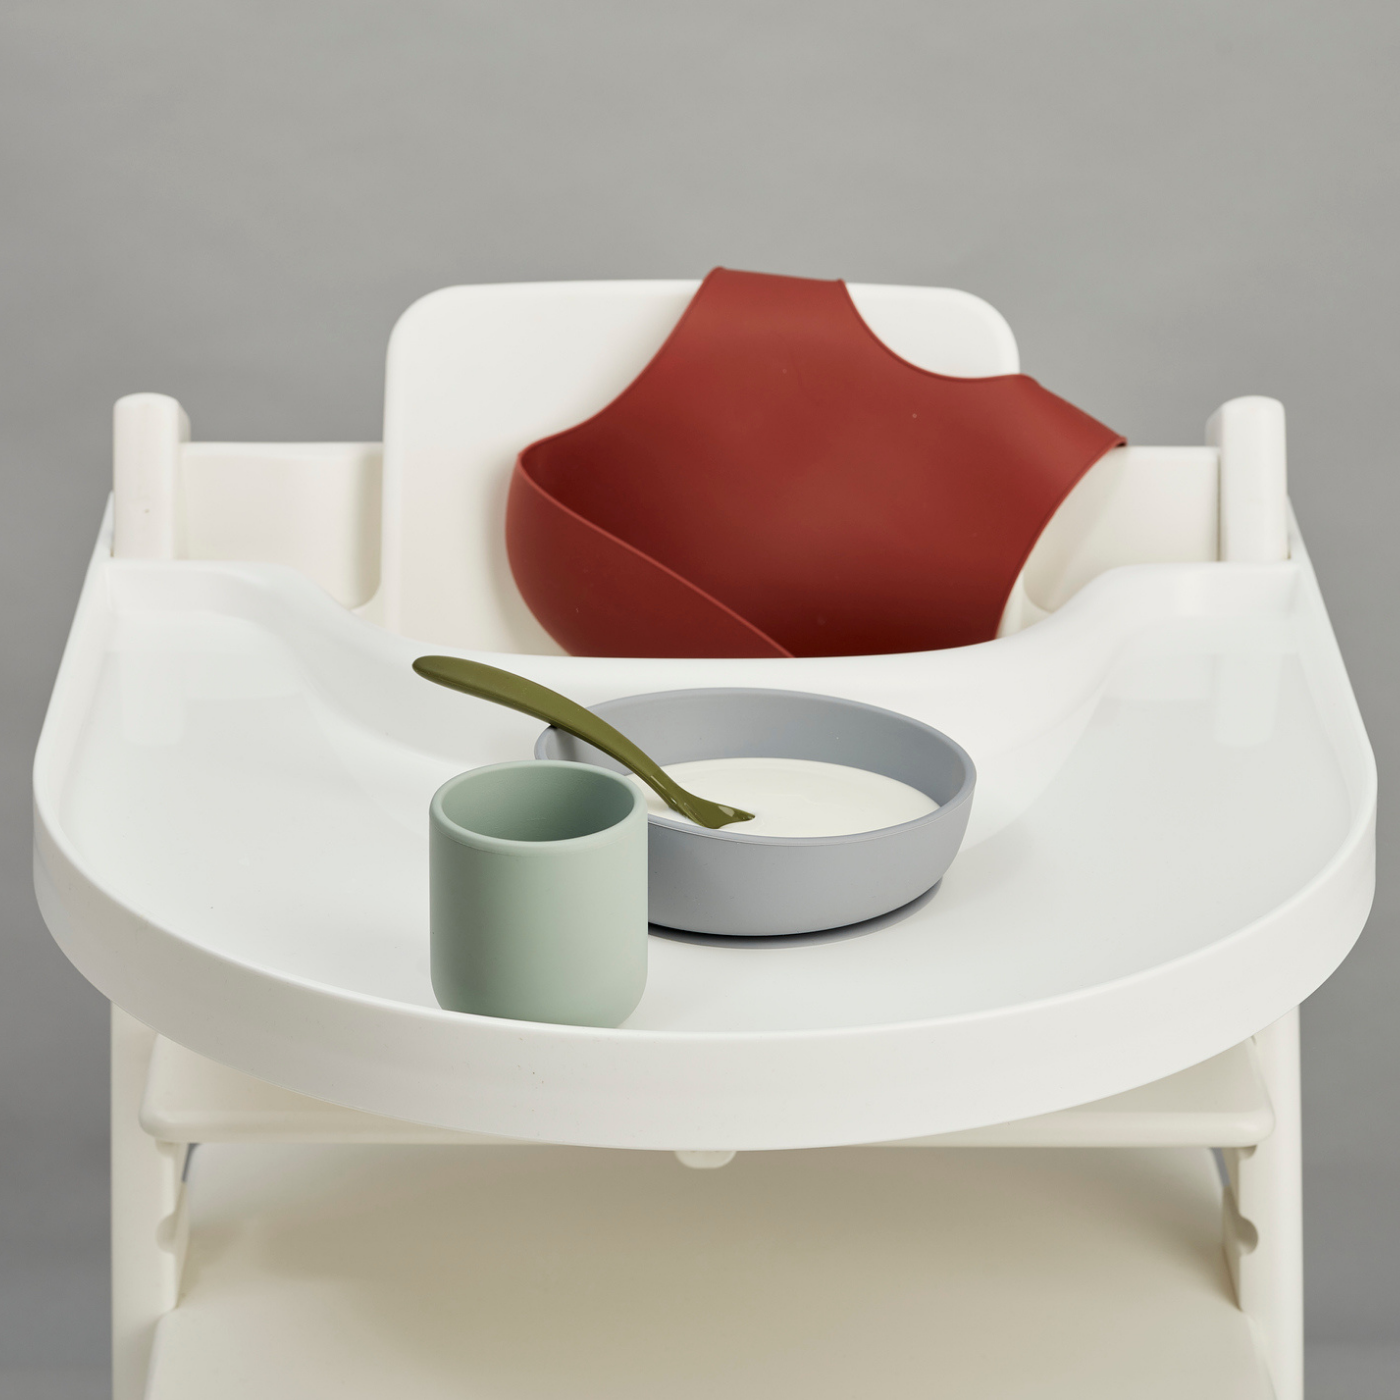 Playtray Tray For Stokke Tripp Trapp Chair